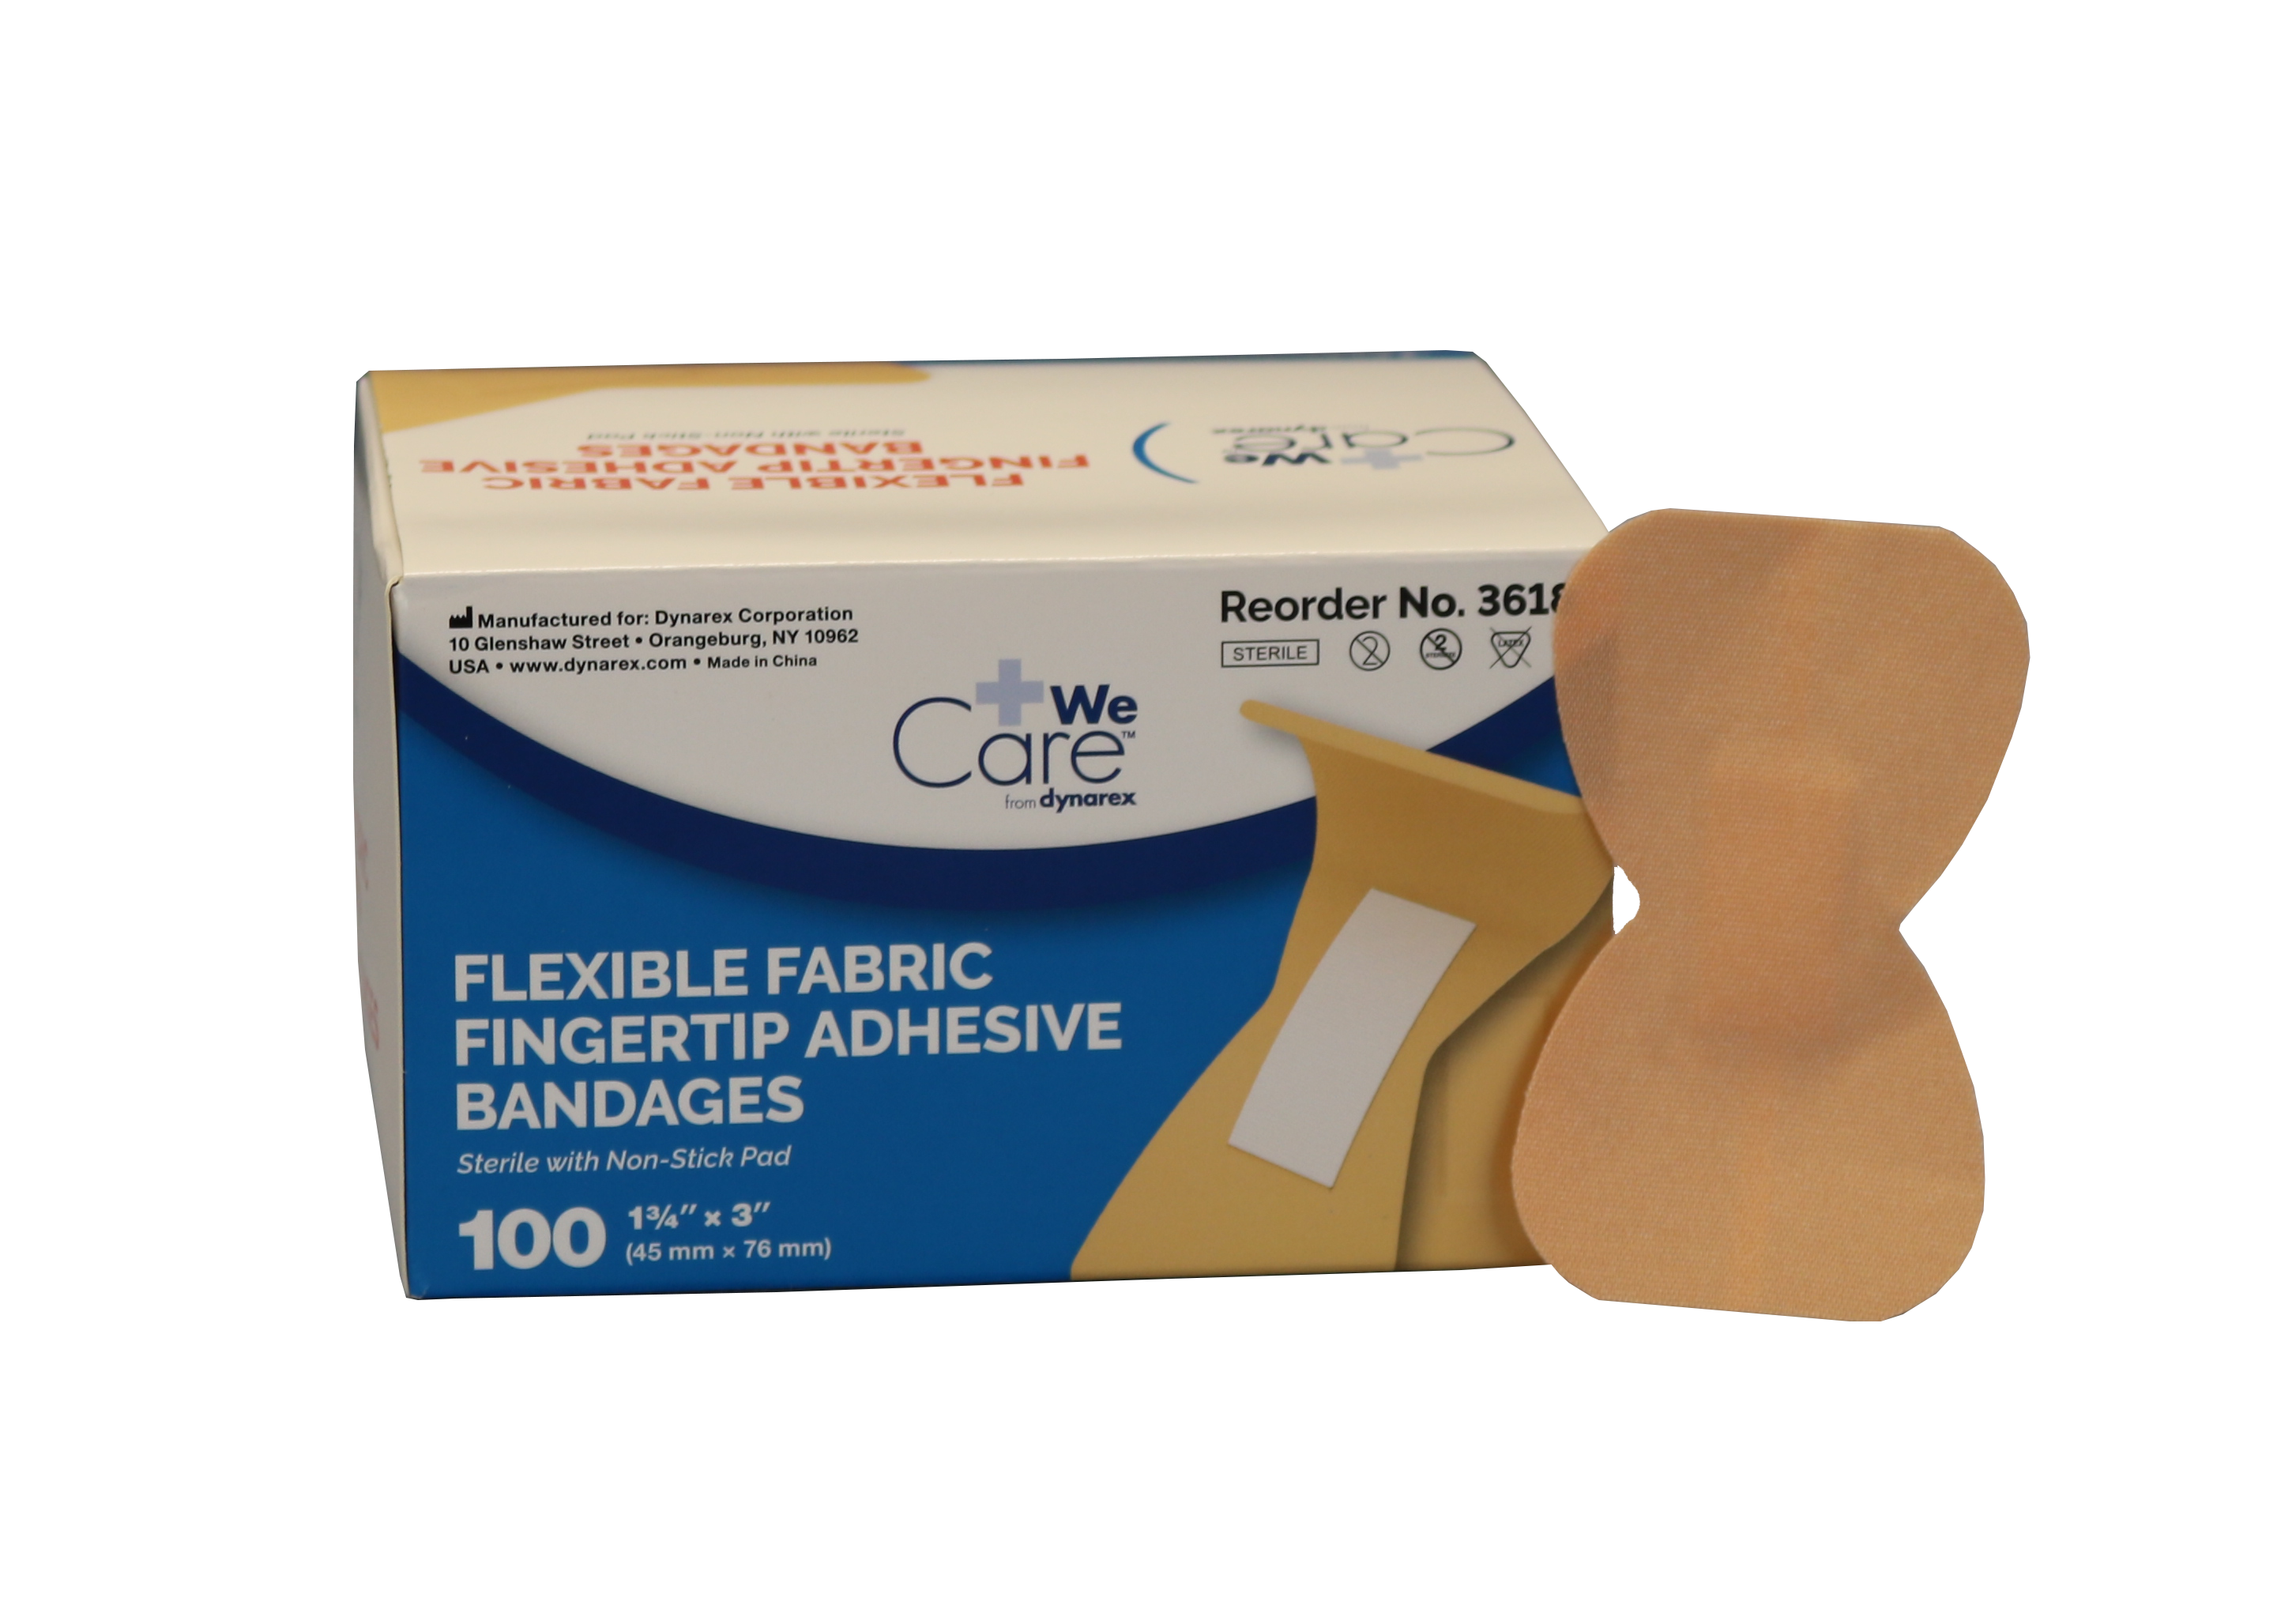 Dynarex Flexible Fabric Adhesive Bandages 3/4 X 3 - 100/box • First Aid  Supplies Online